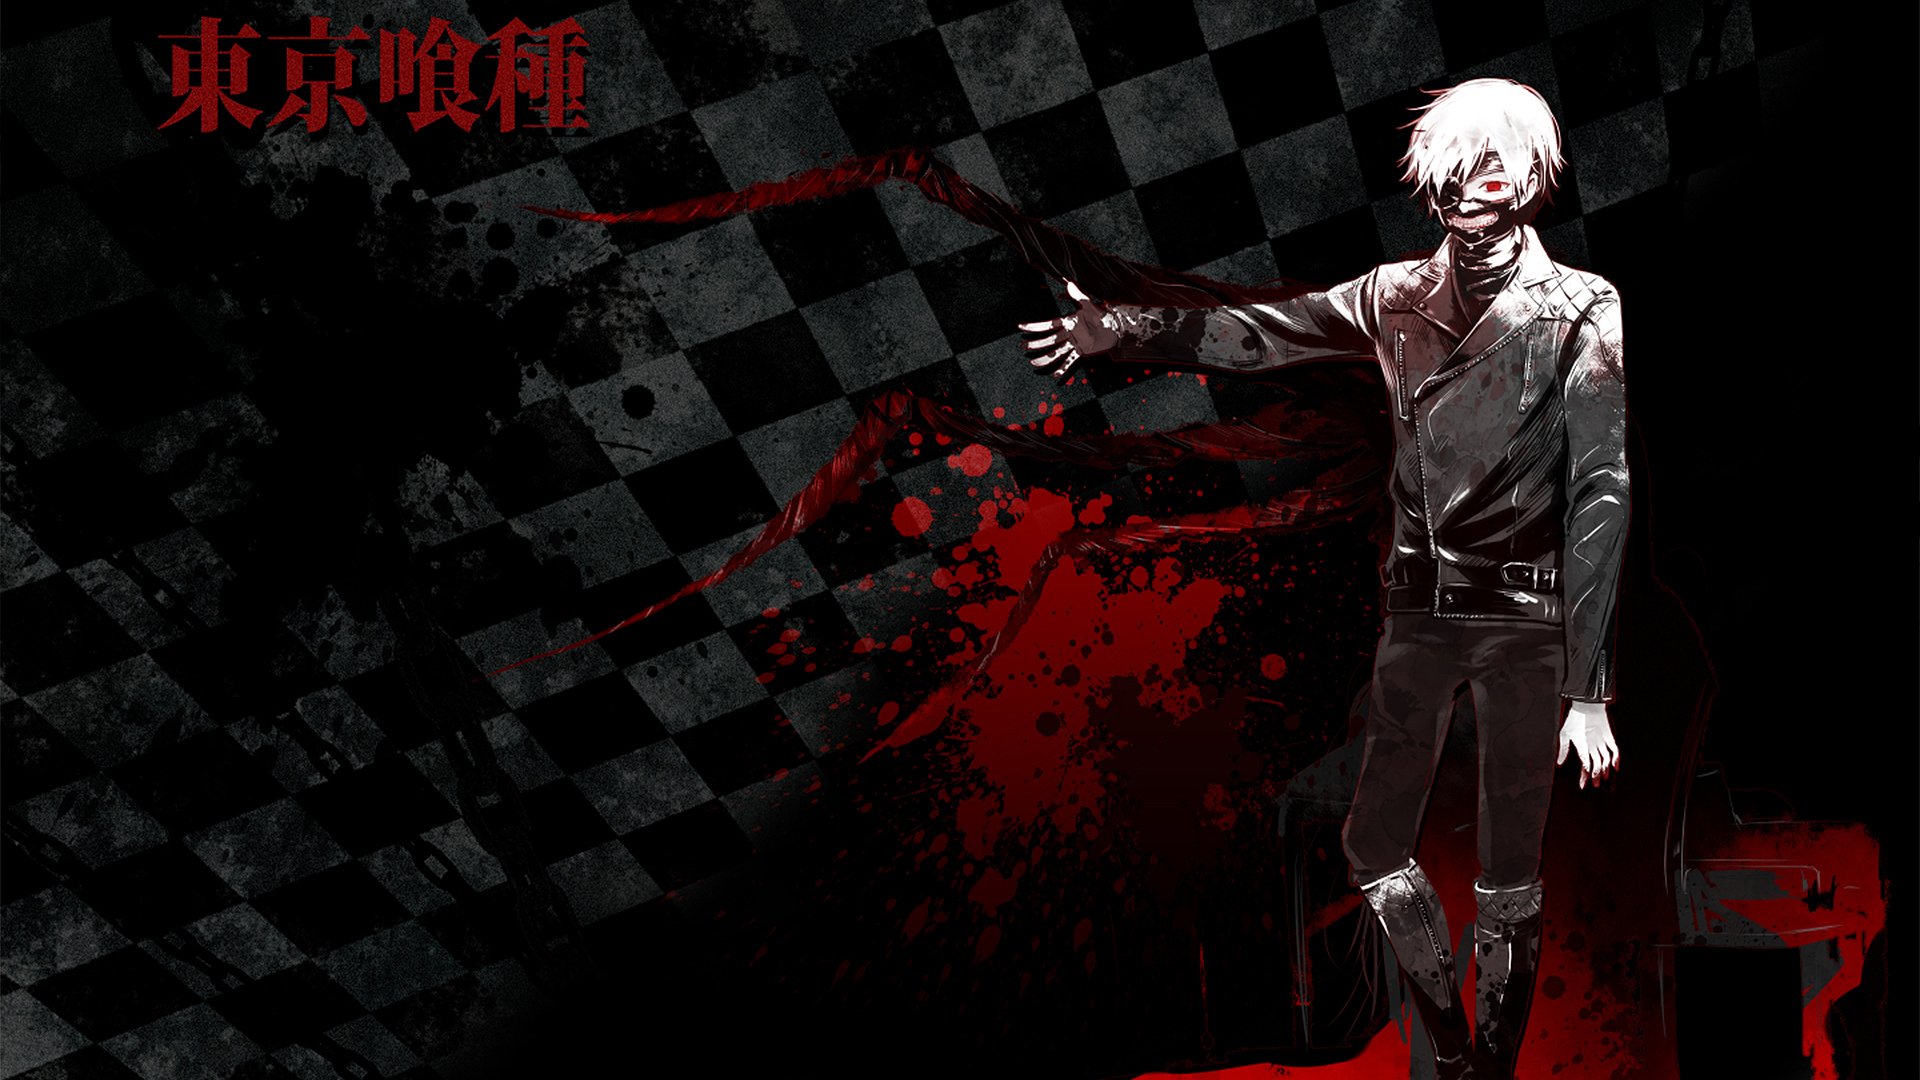 Tokyo Ghoul HD Wallpaper | Background Image | 1920x1080 | ID:596877 - Wallpaper Abyss